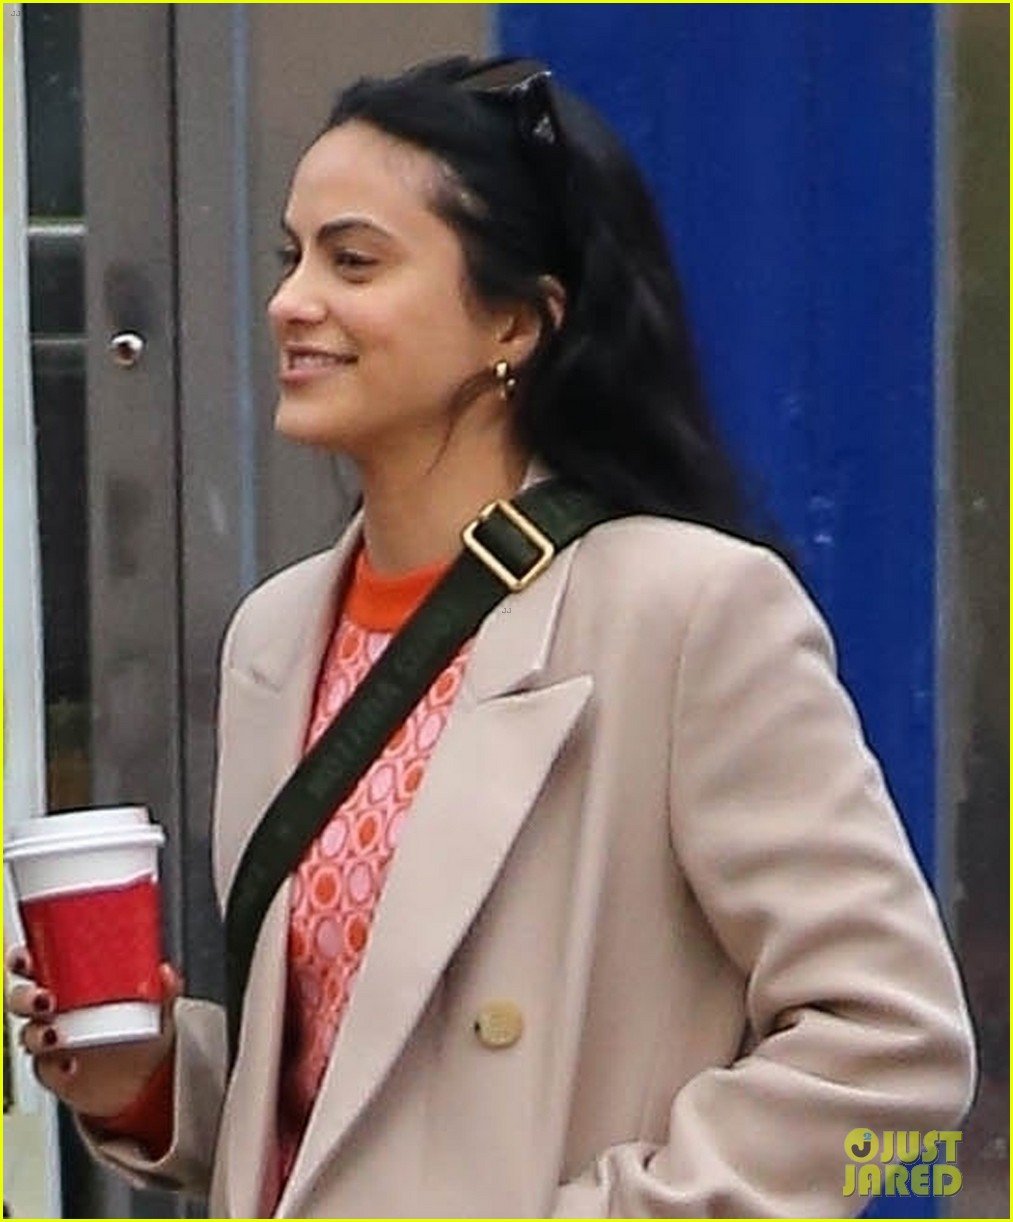 camila mendes hangs out with miles chamley watson in nyc 04